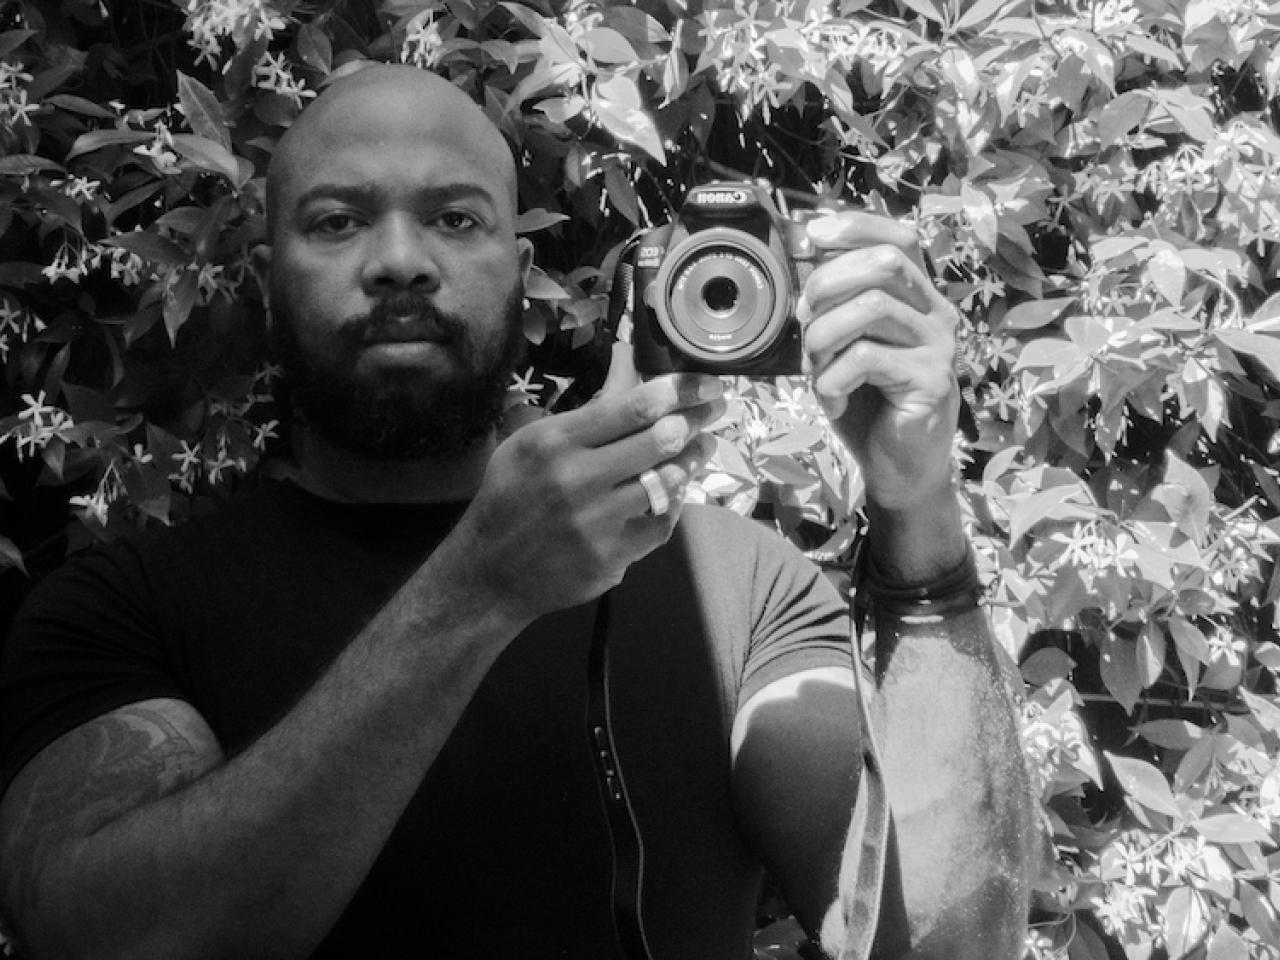 In this black and white photo, African-American filmmaker Daryl P Jones stands in front of flowering jasmine, looking directly at the camera. He holds up a digital video camera near his shoulder. He’s bald and has a thick beard.